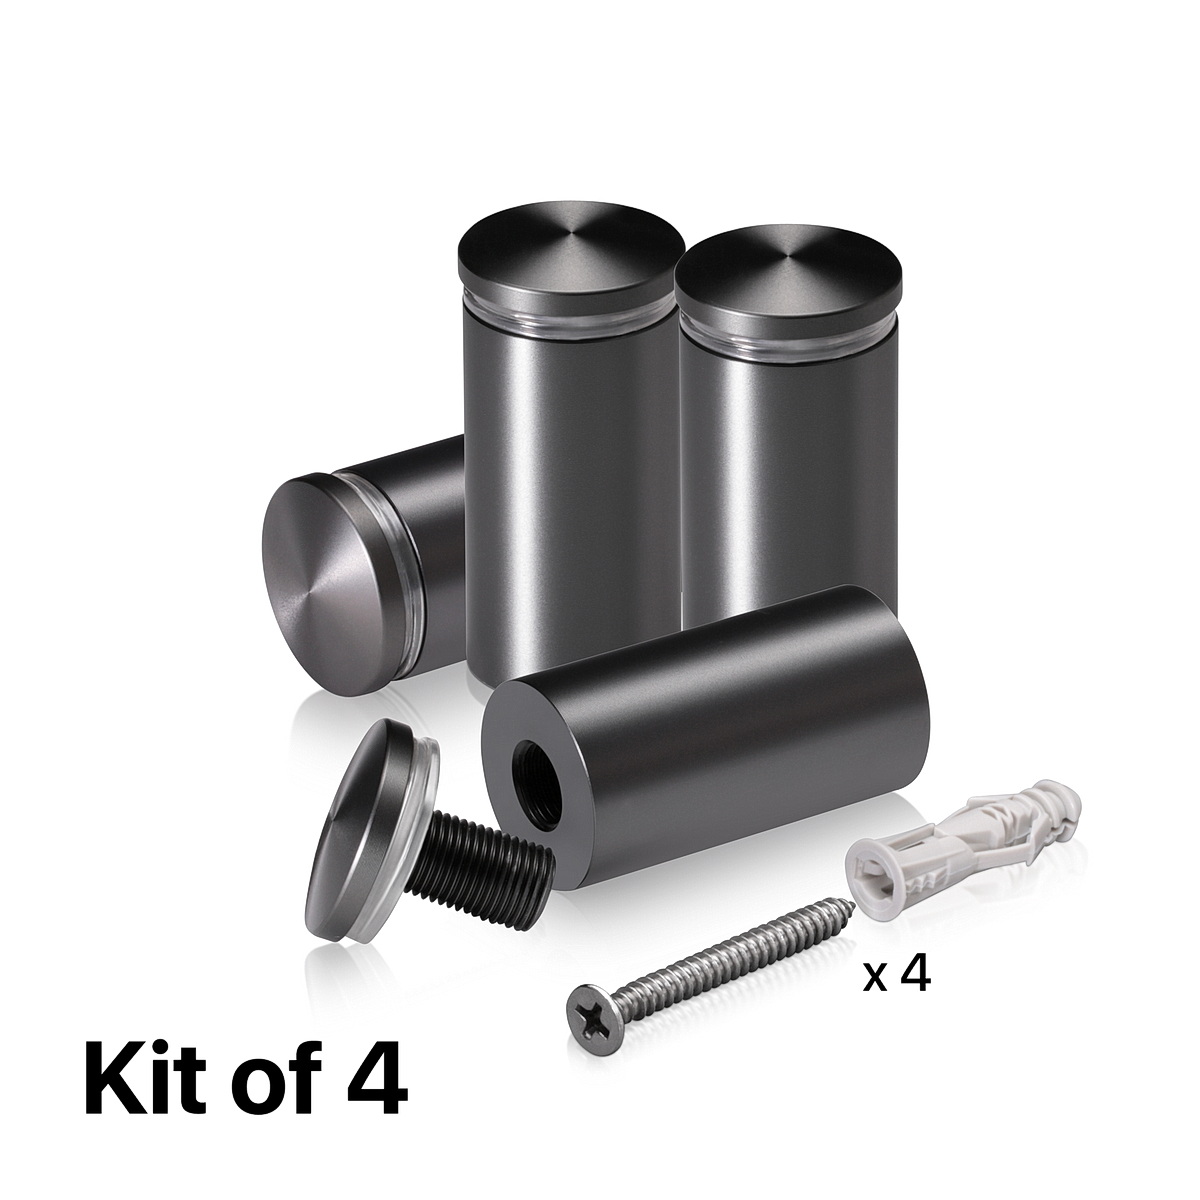 (Set of 4) 1'' Diameter X 1-3/4 Barrel Length, Aluminum Rounded Head Standoffs, Titanium Anodized Finish Standoff with (4) 2216Z Screws and (4) LANC1 Anchors for concrete or drywall (For Inside / Outside use) [Required Material Hole Size: 7/16'']